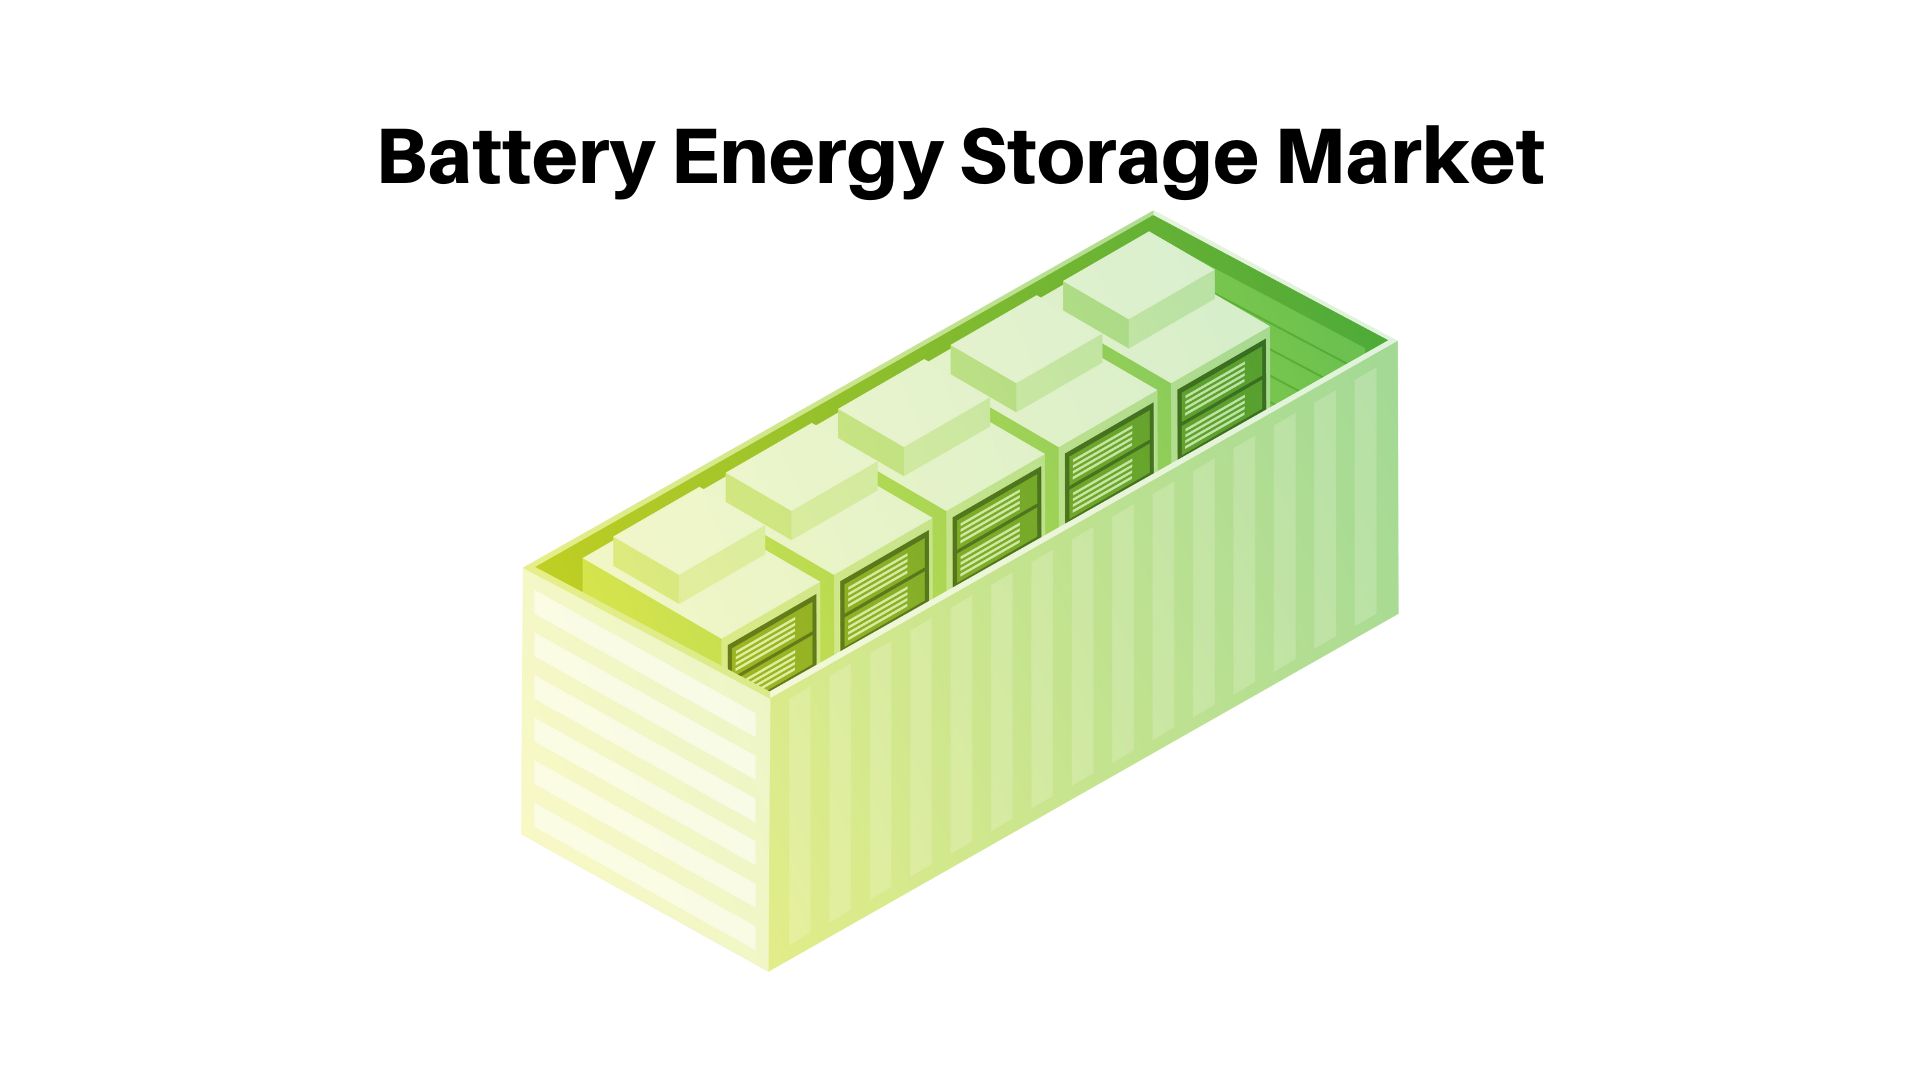 Battery Energy Storage Systems Market is projected to reach USD 546.1 Billion by 2032